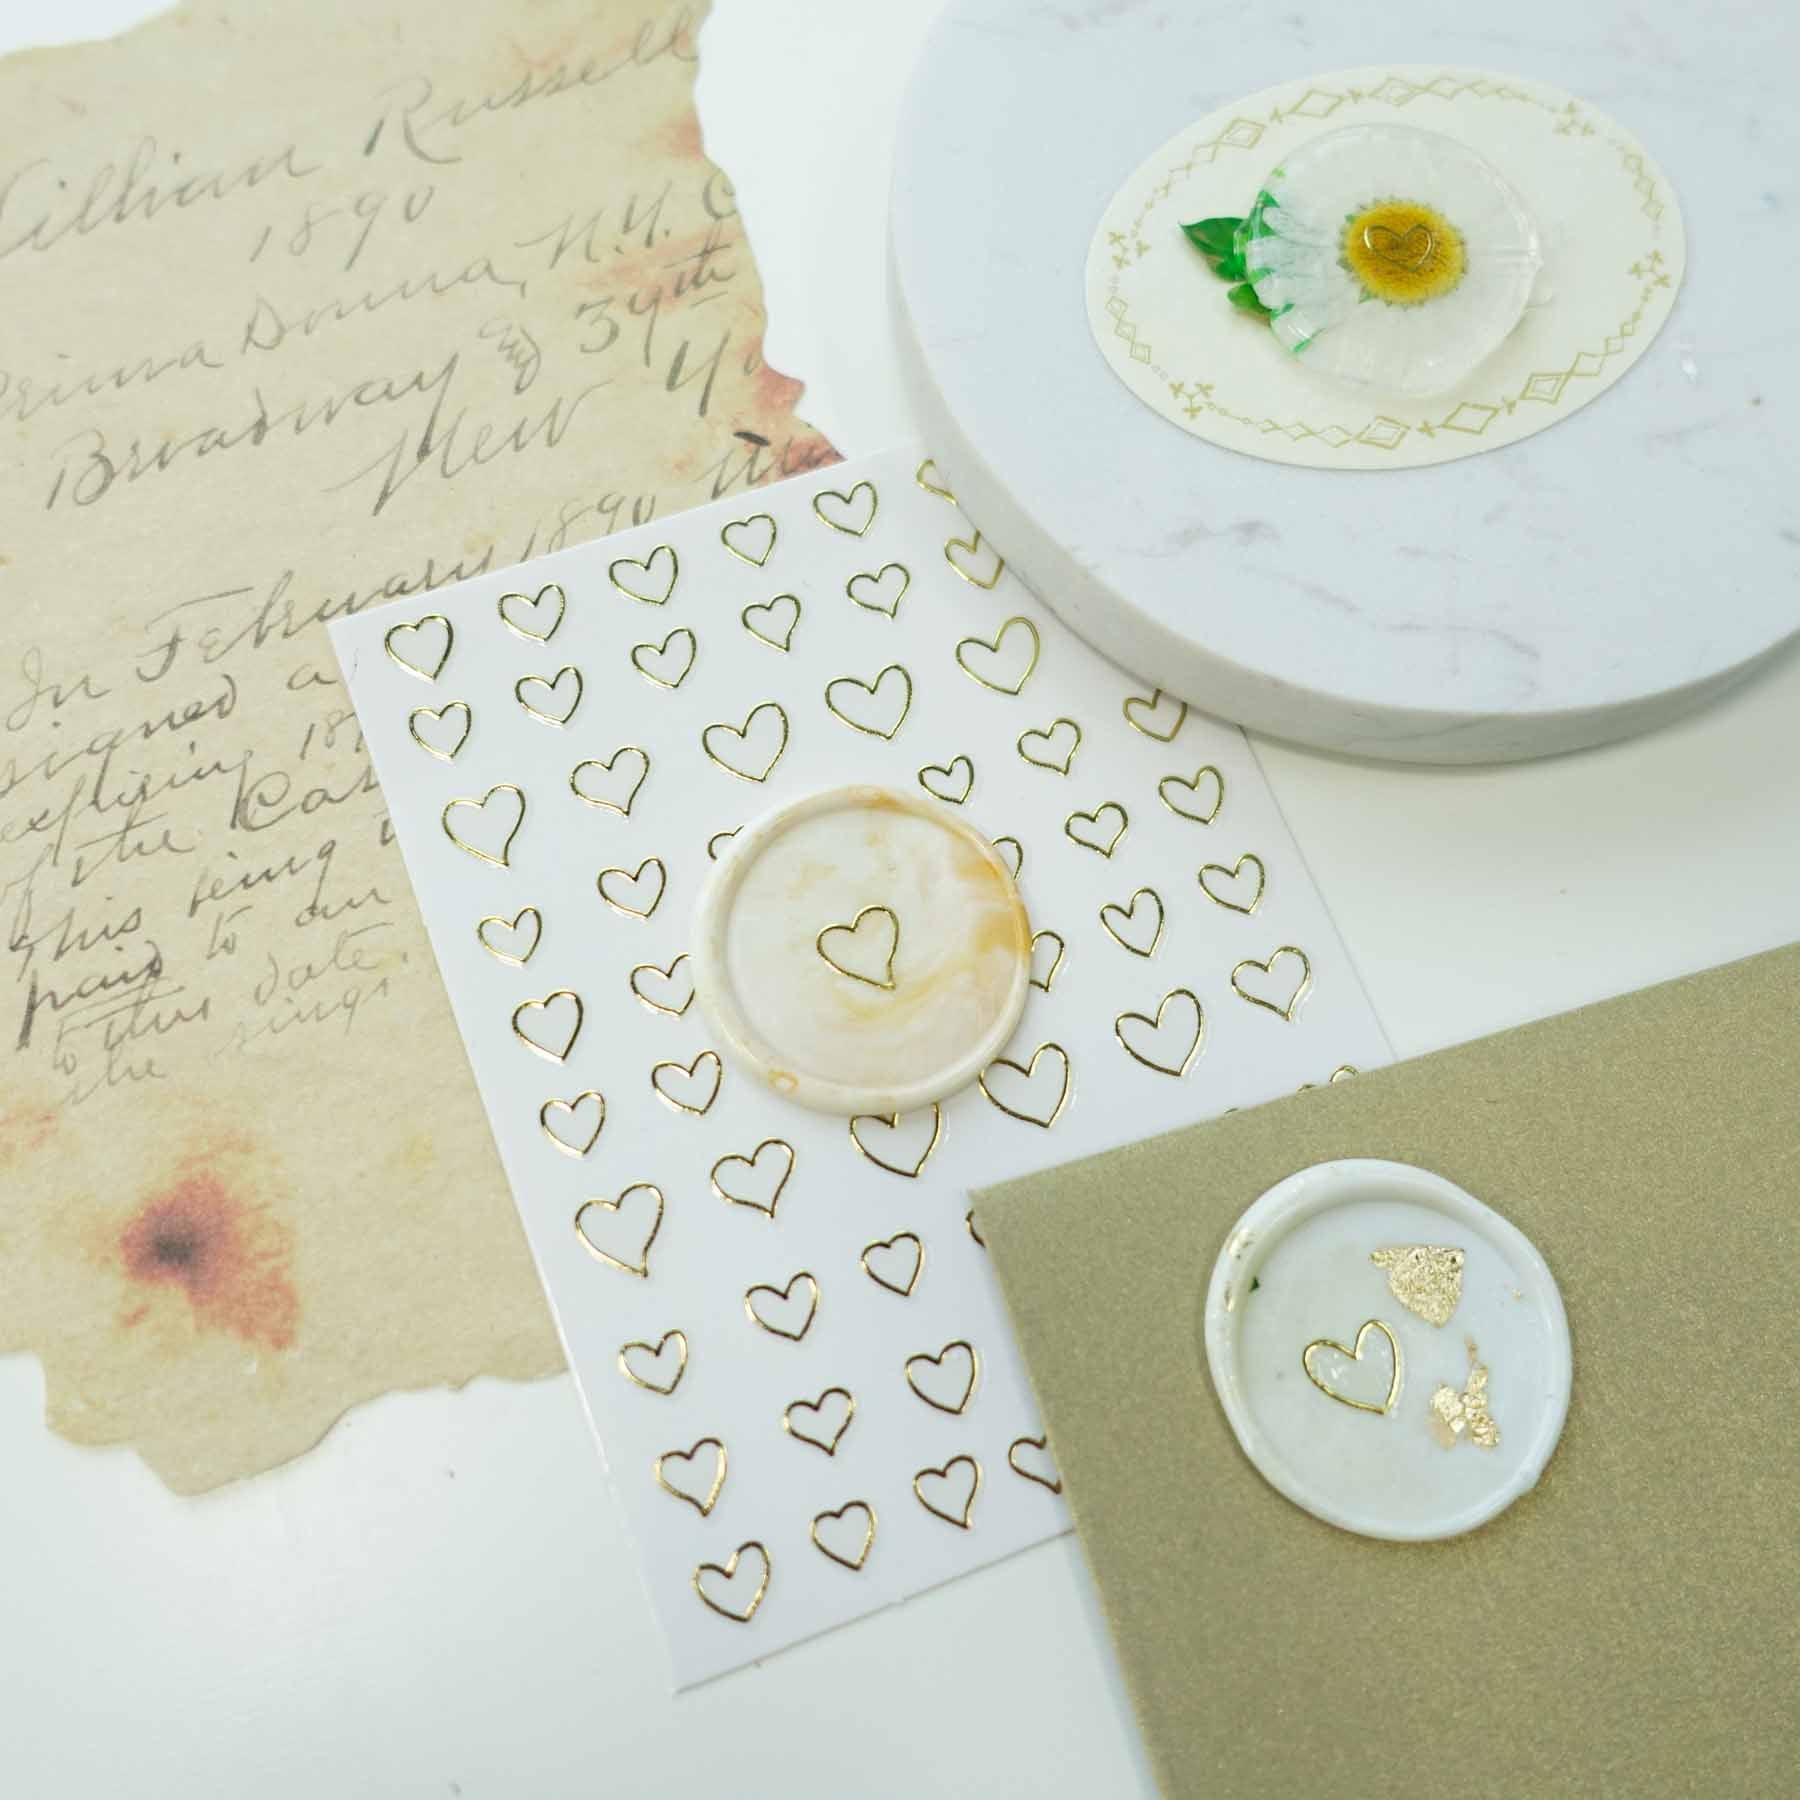 Gold Heart Outlines Clear-Backed Decorative Stickers Sheet